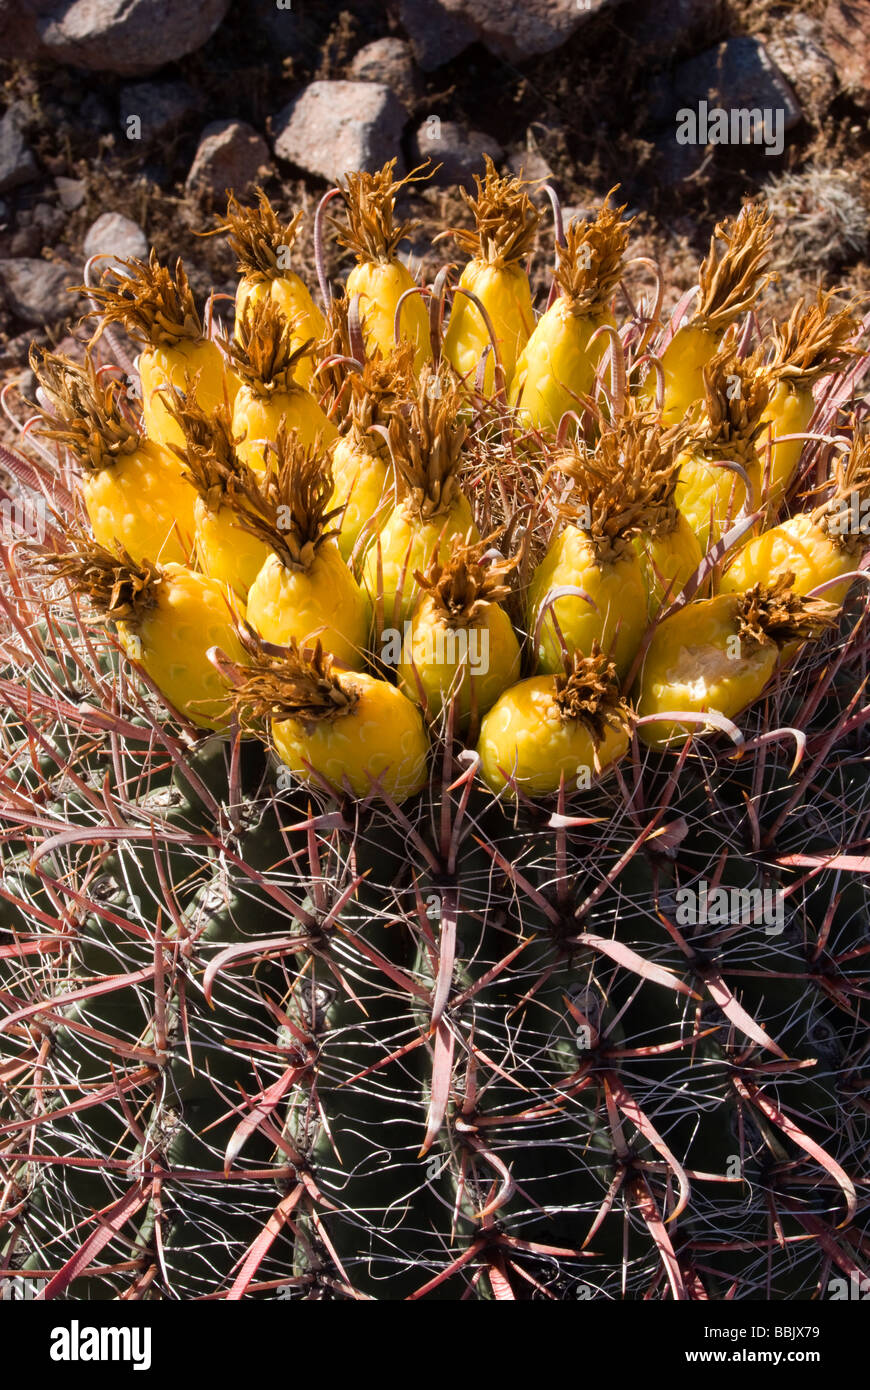 USA Arizona Picacho Button hook Cactus flowers in bloom Picacho Peak State Park Stock Photo